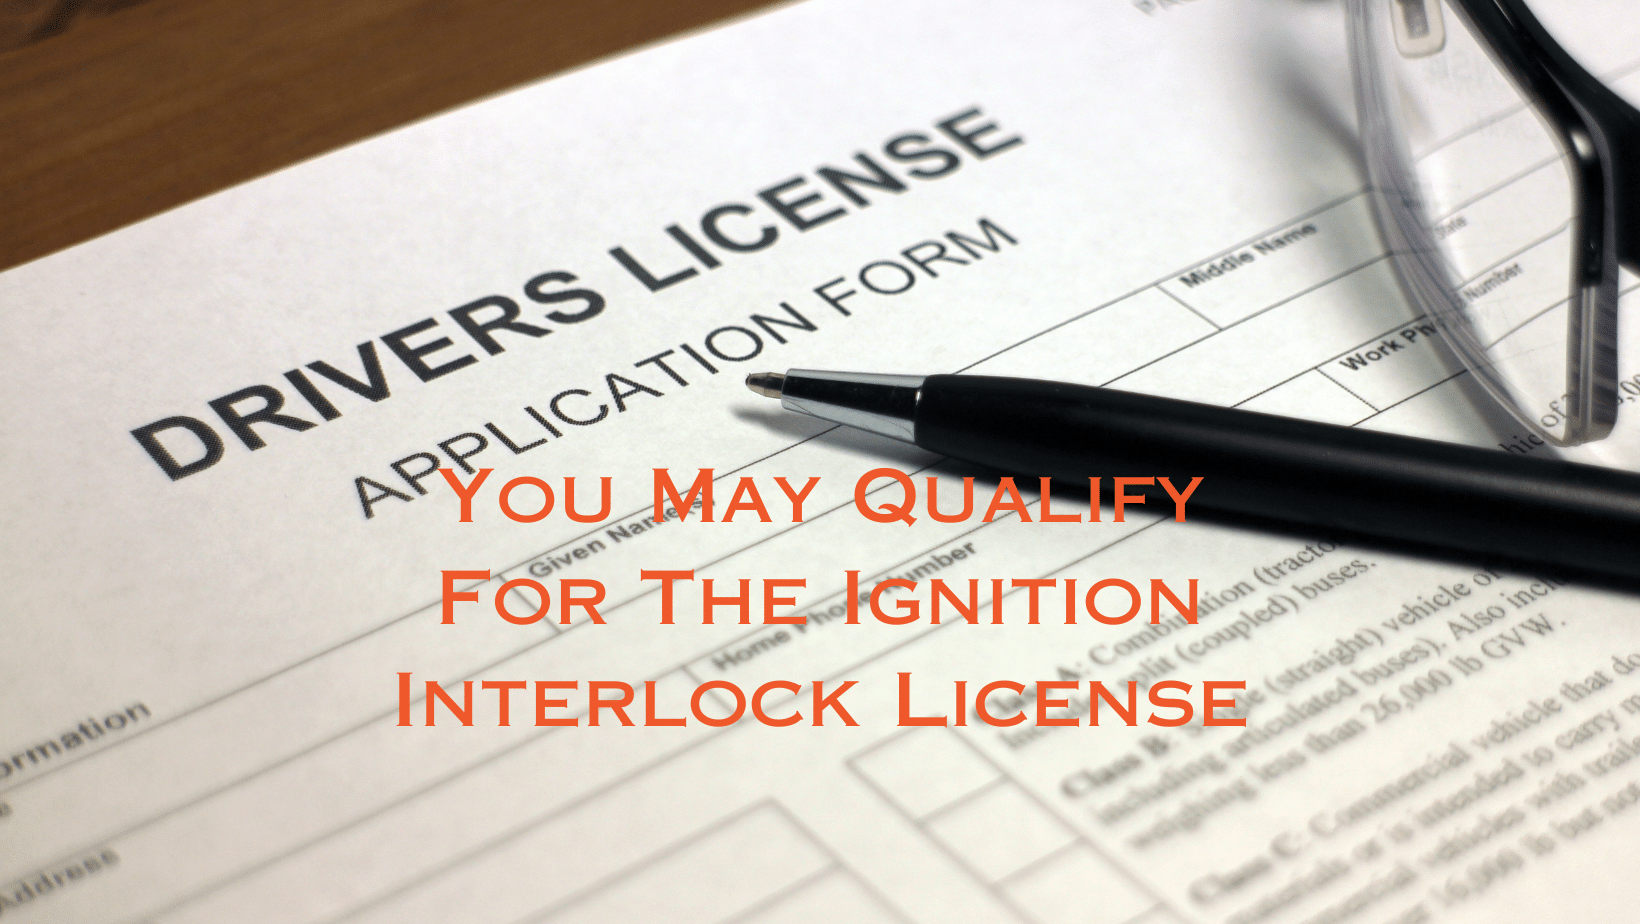 The ignition interlock license allows you to drive after being suspended for a DUI arrest.
Witt Law Group
Attorney Ryan Witt
Attorney Jennifer Witt